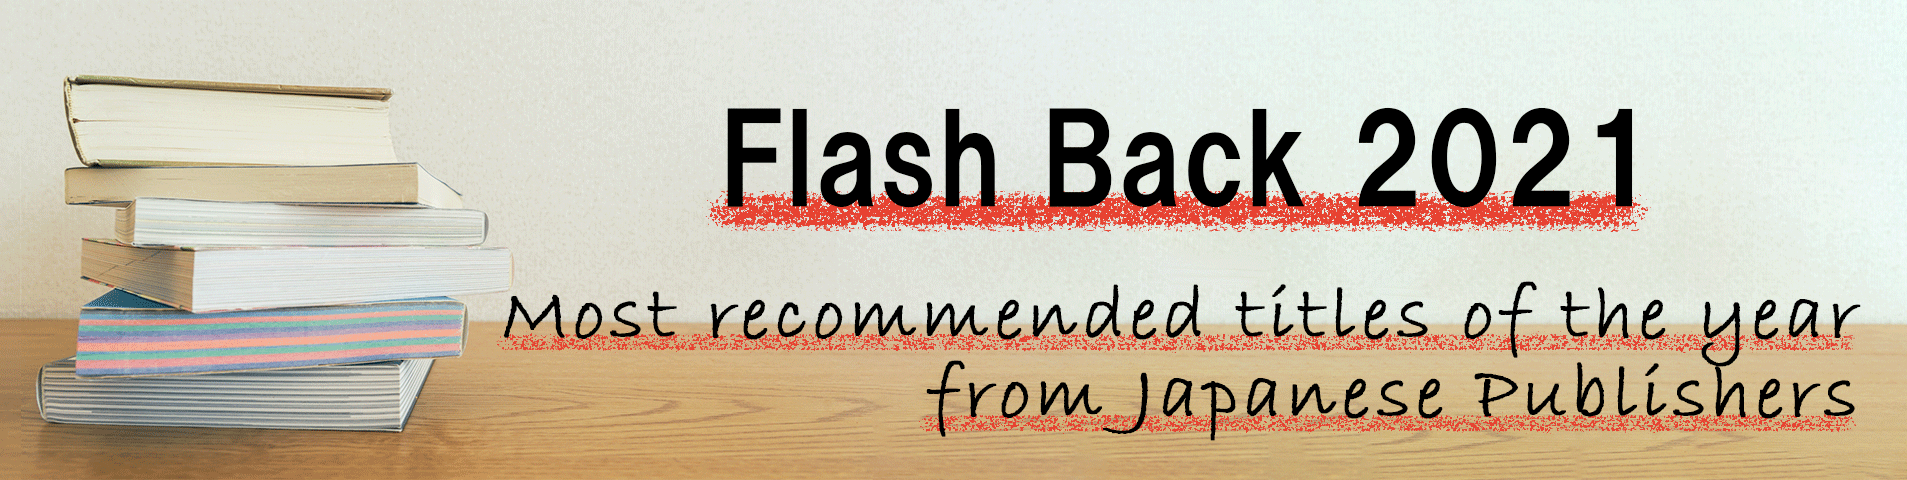 Flash Back 2021 ~most recommended titles of the year from Japanese publishers~